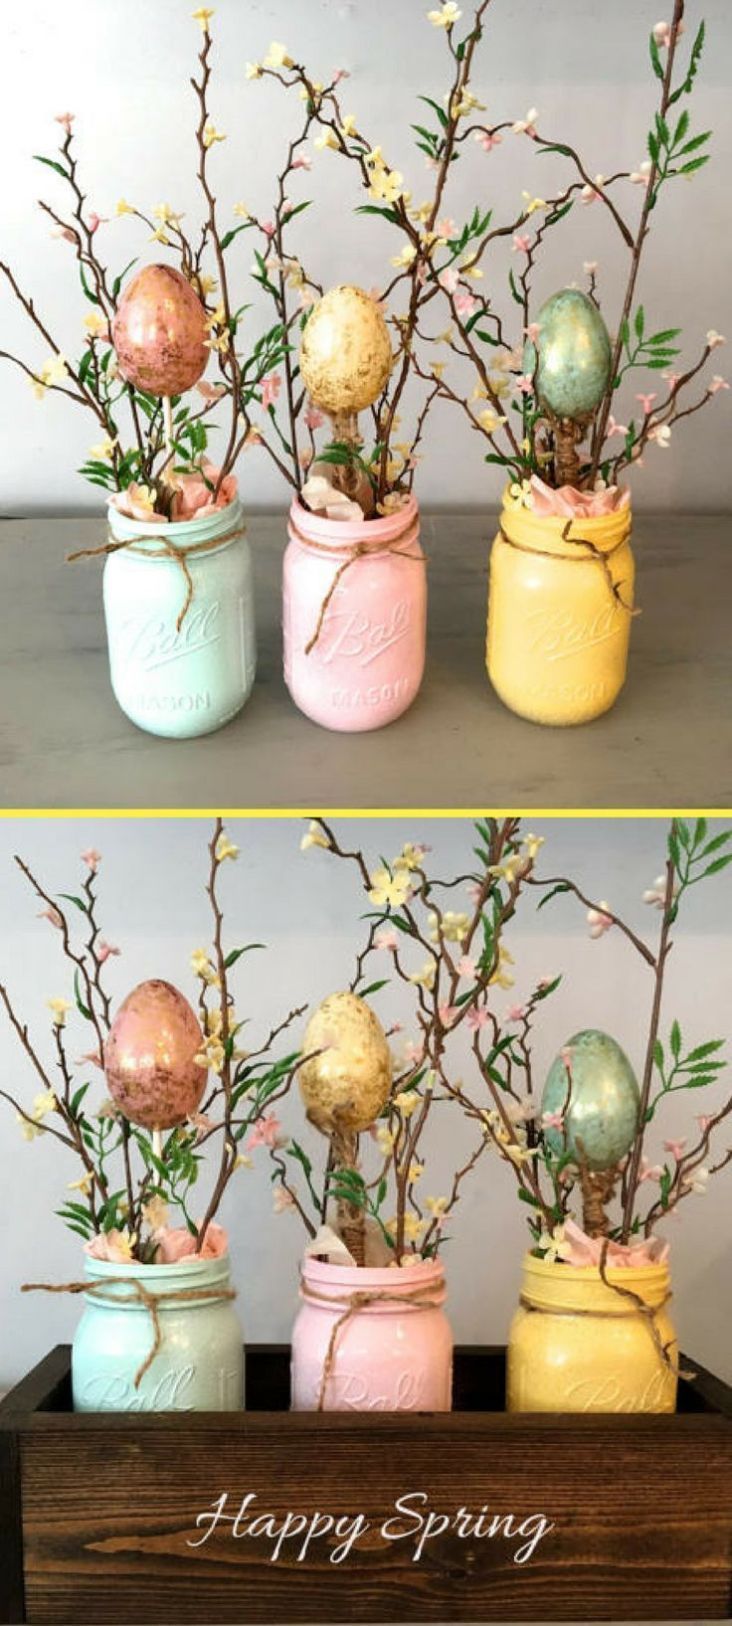 50 Gorgeous DIY Easter Decor Ideas - This Tiny Blue House -   19 holiday Decorations easter ideas